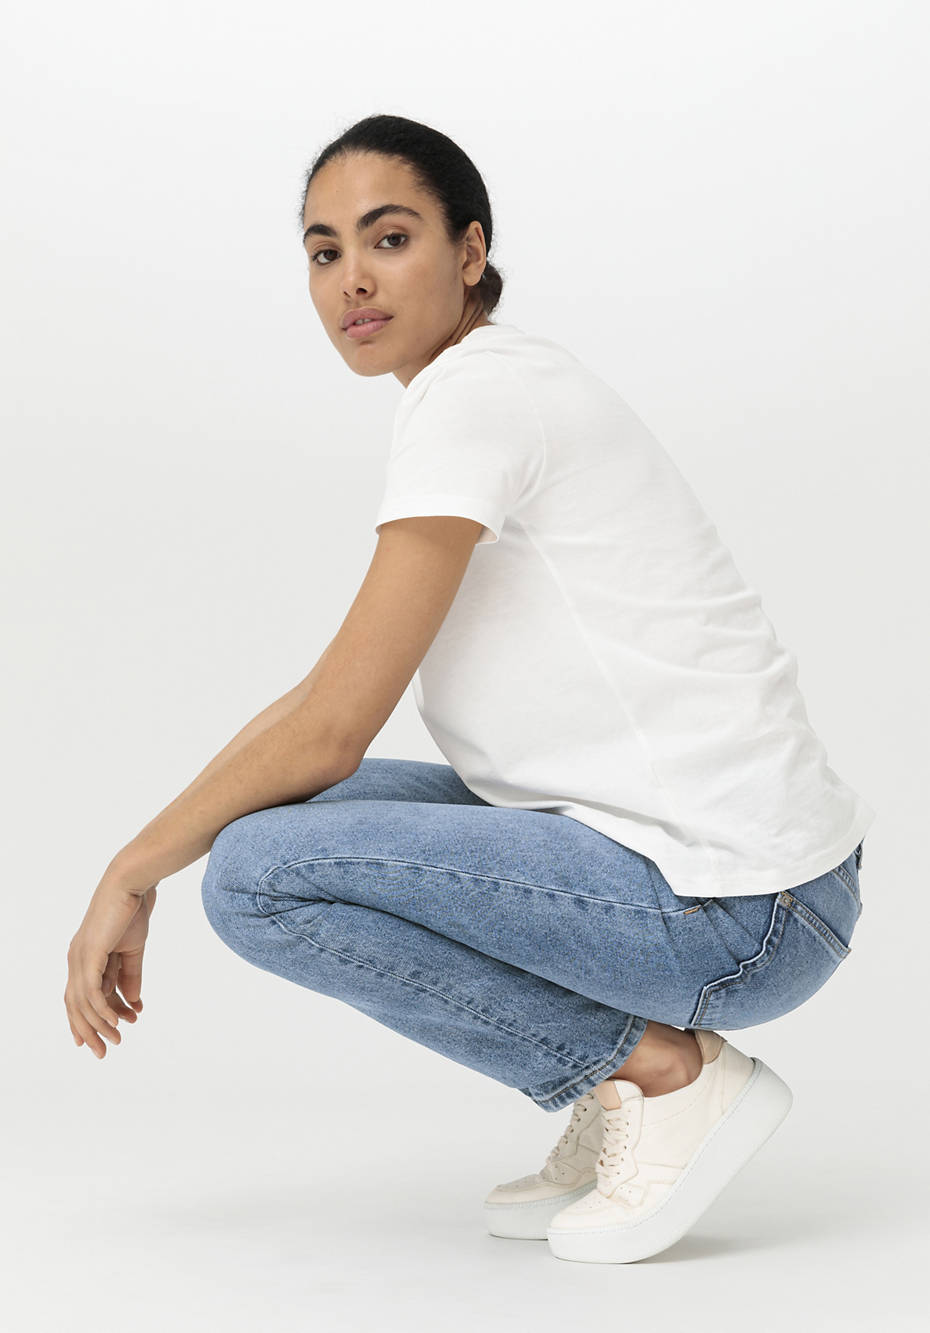 Hanna Mom Fit jeans made from pure organic denim